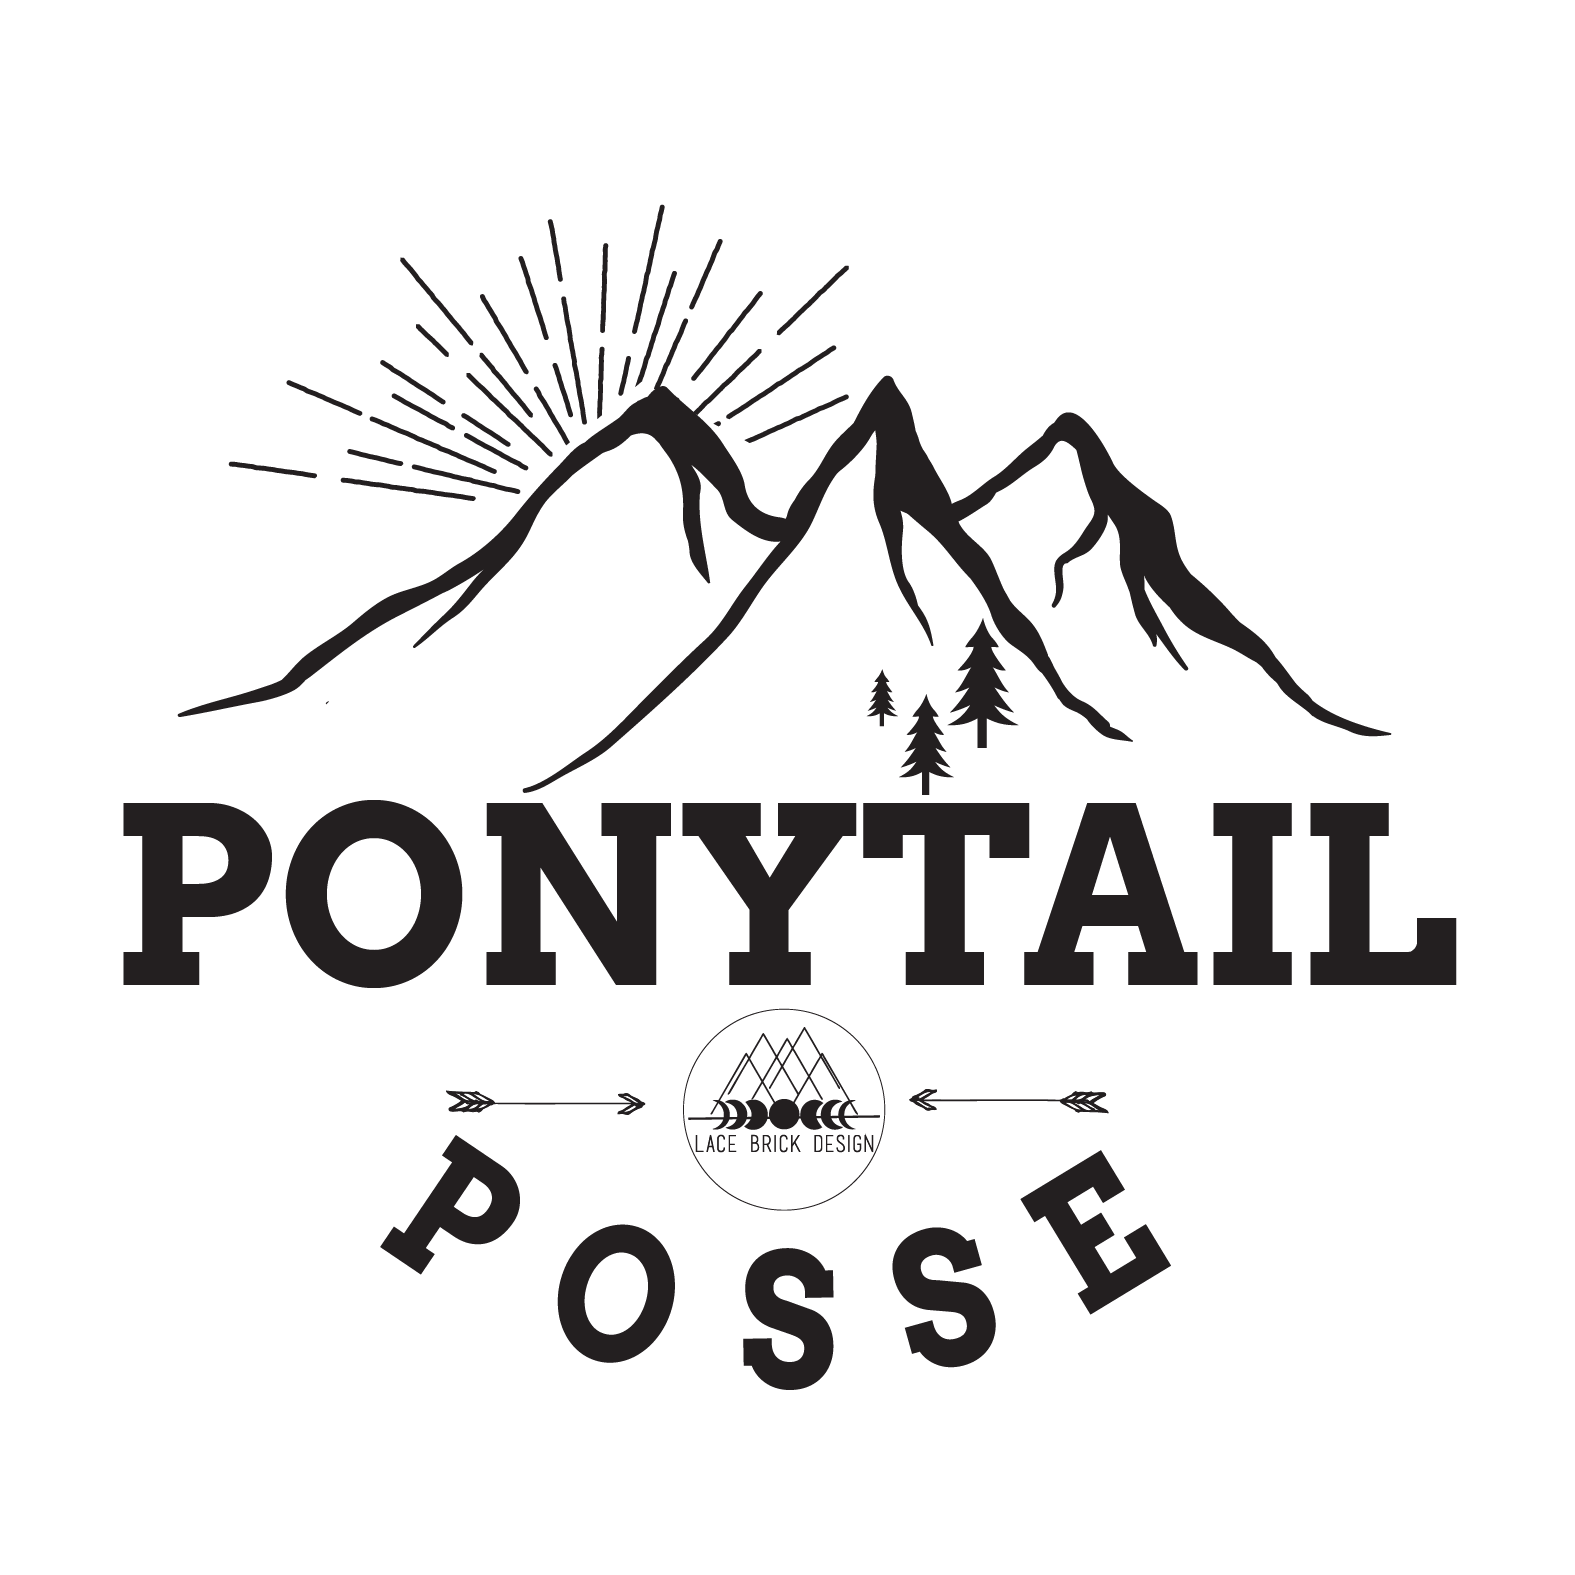 Introducing the Ponytail Posse